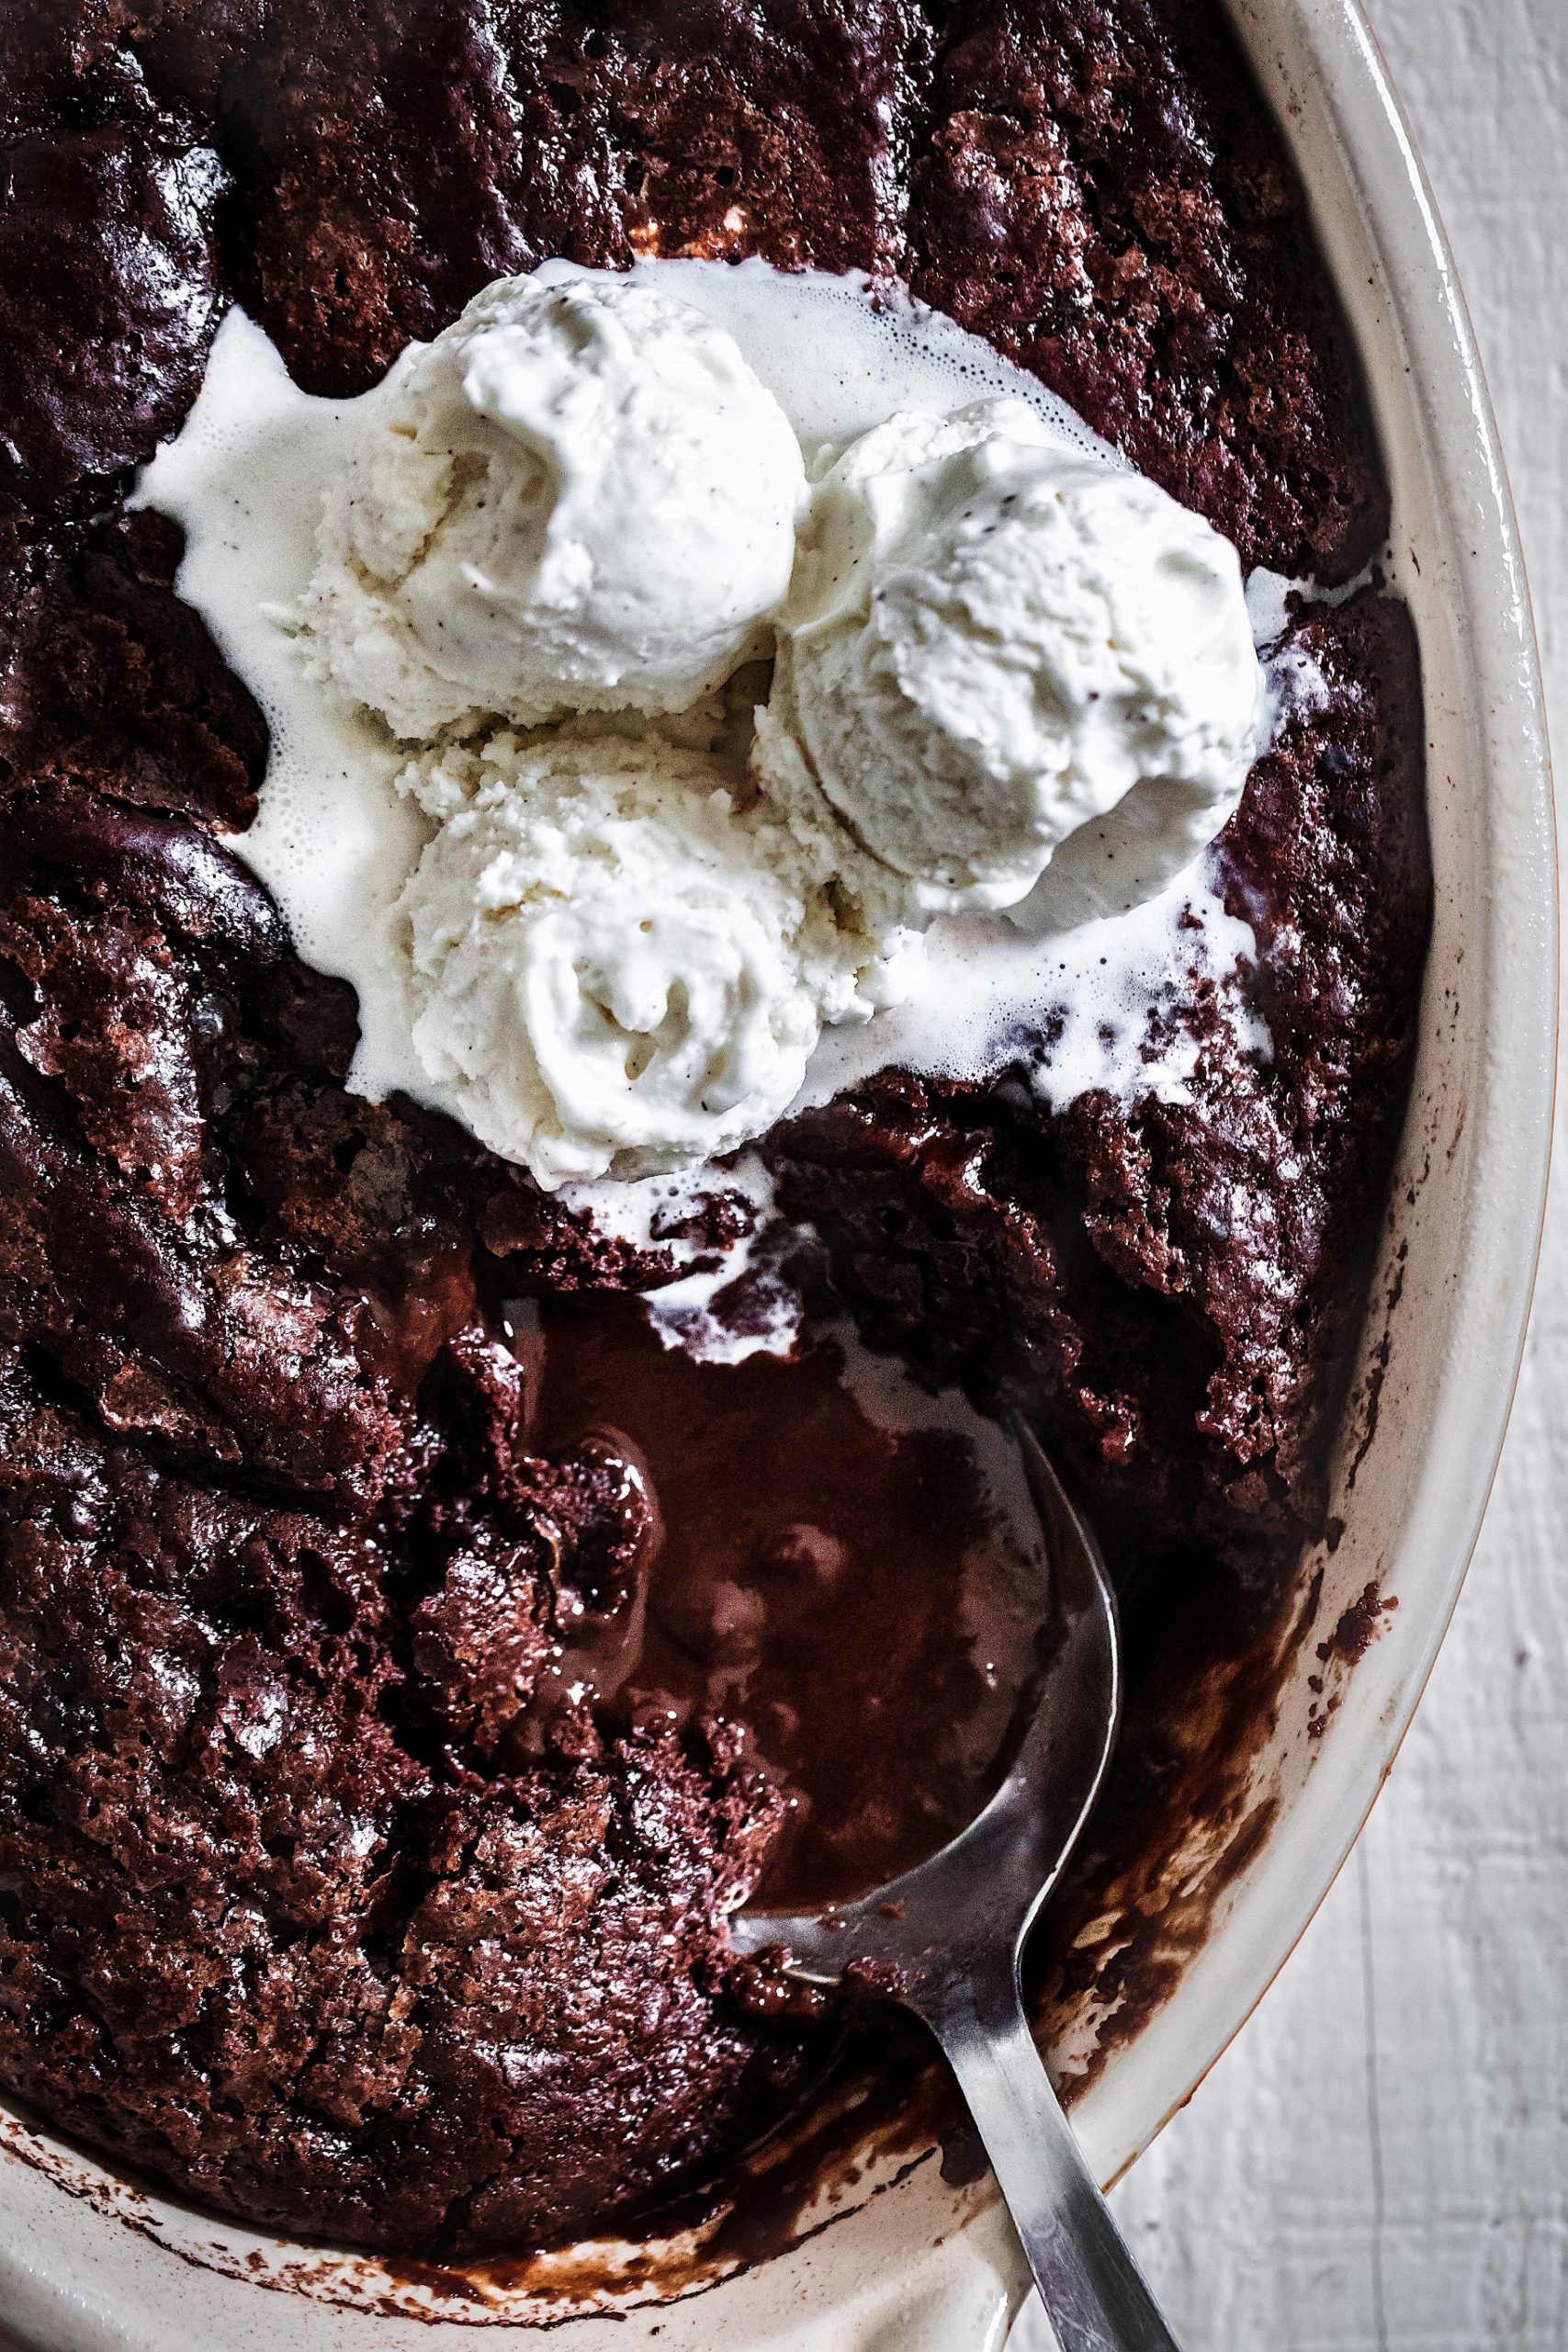 New! A Killer Chocolate Cobbler to Beat All Others